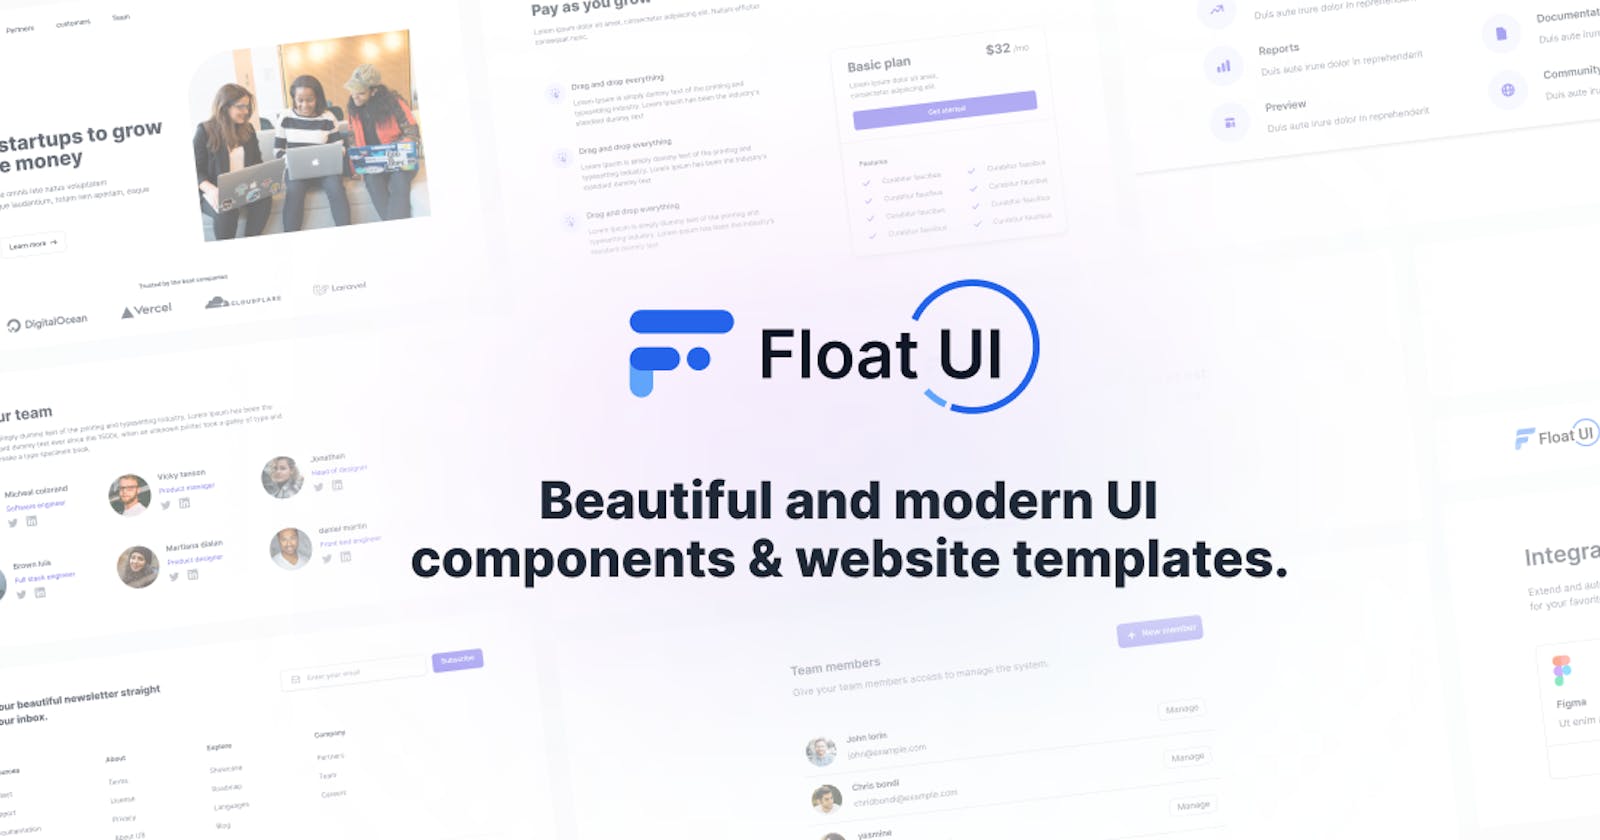 What is new in Float UI - The UI components & Website templates